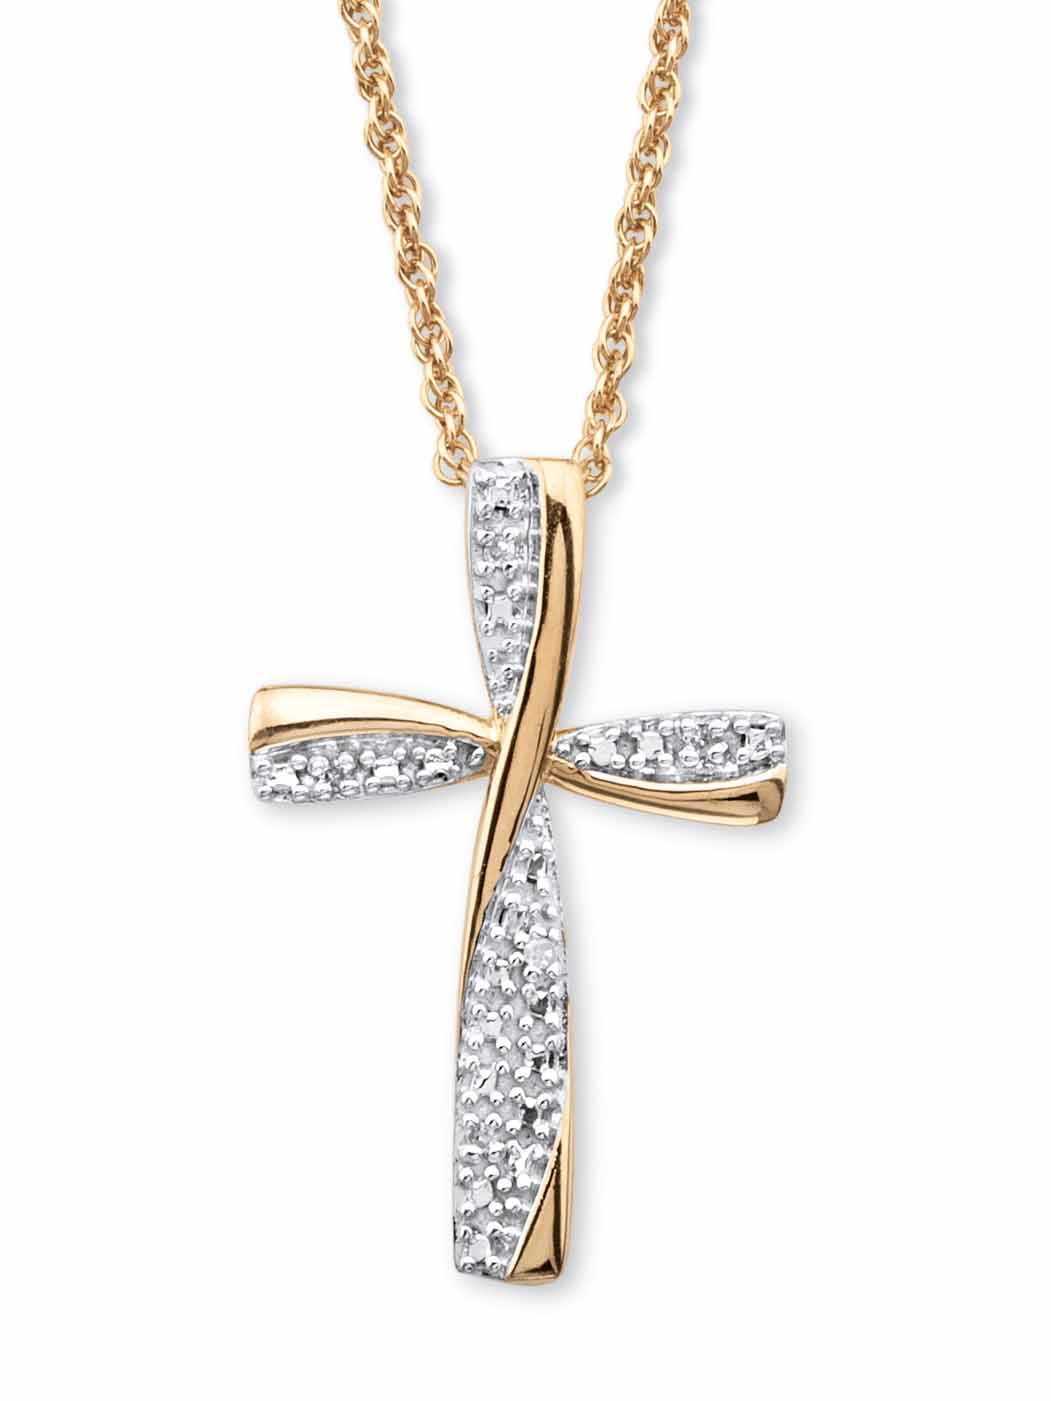 Solid GoldTone Crystal Cross 18in Pendant Necklace Charm Chain with 